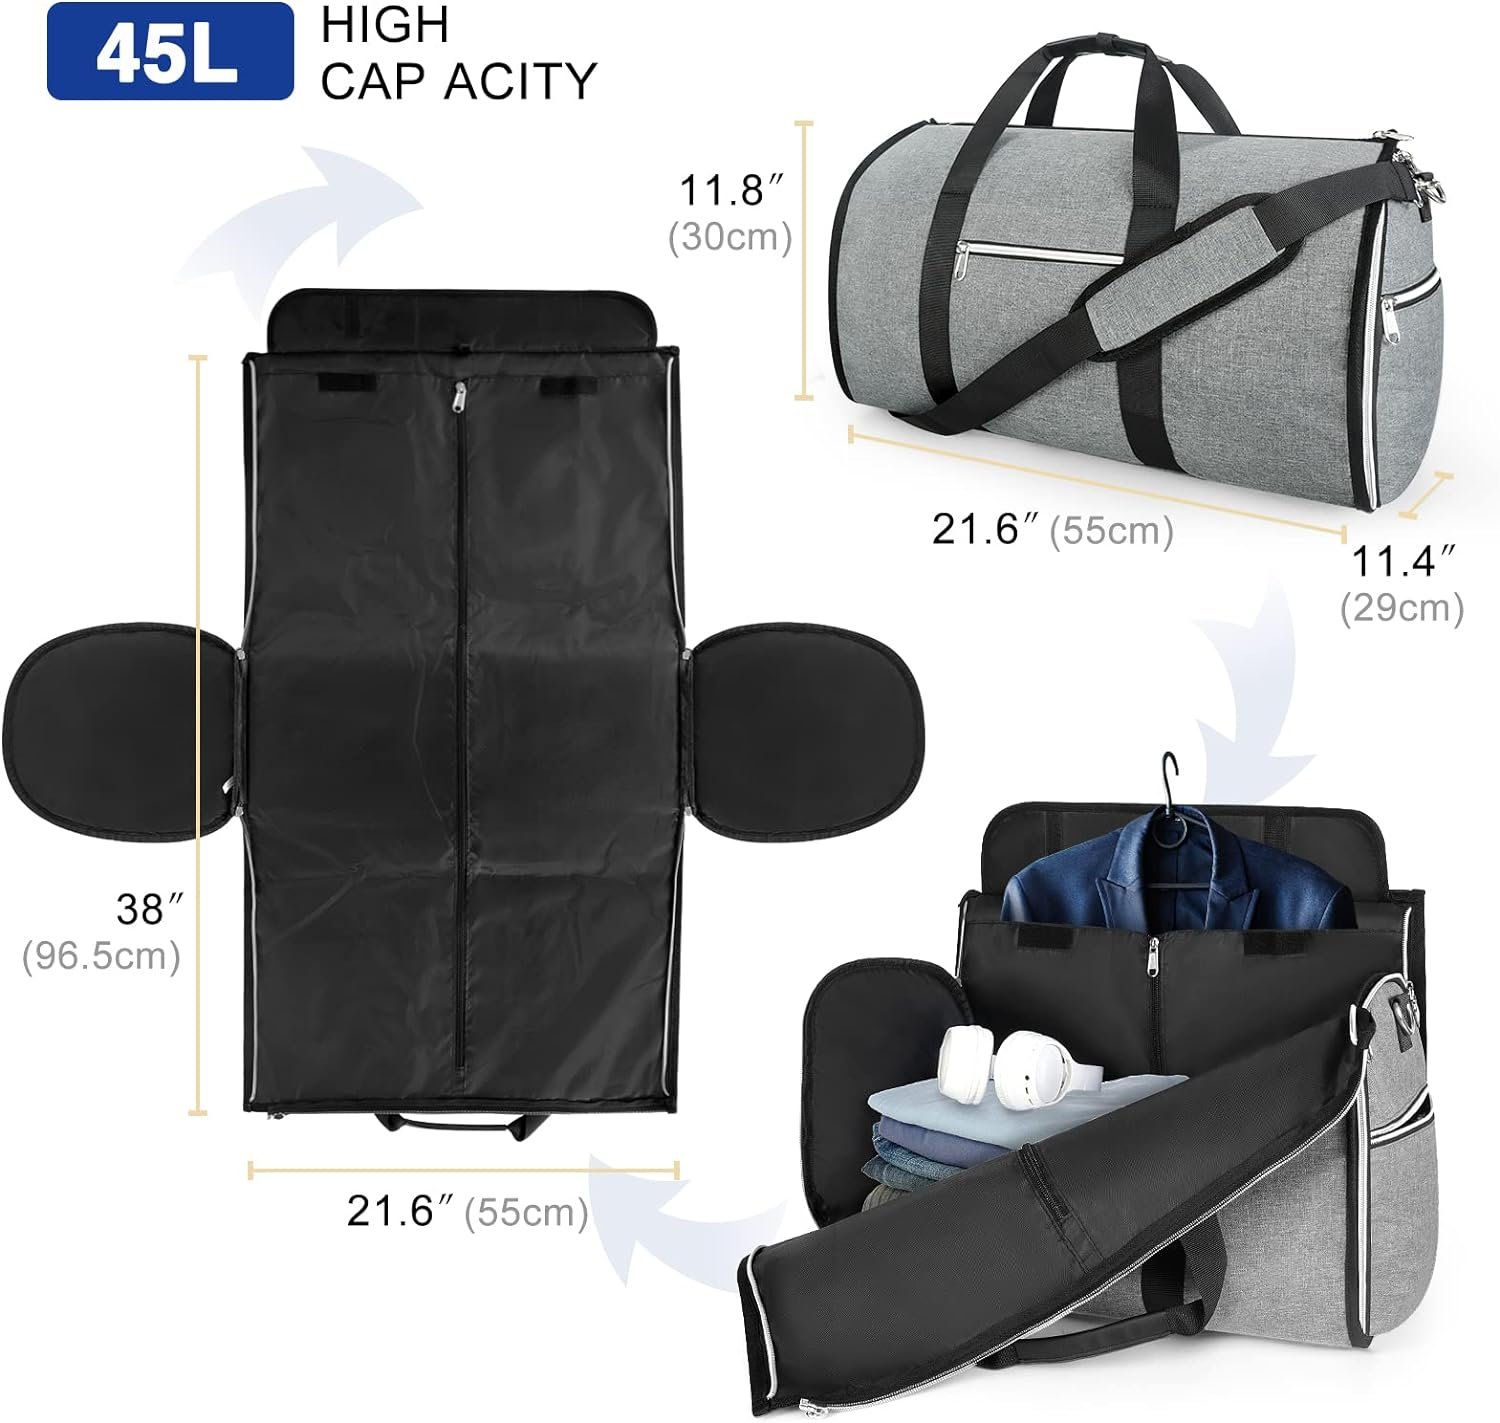 Carry On Garment Bags for Travel,Suit Travel Bag for Men Women,With Shoulder Strap for Business Trips Bag 2 in1 Suitcase for Foldable Luggage Bag